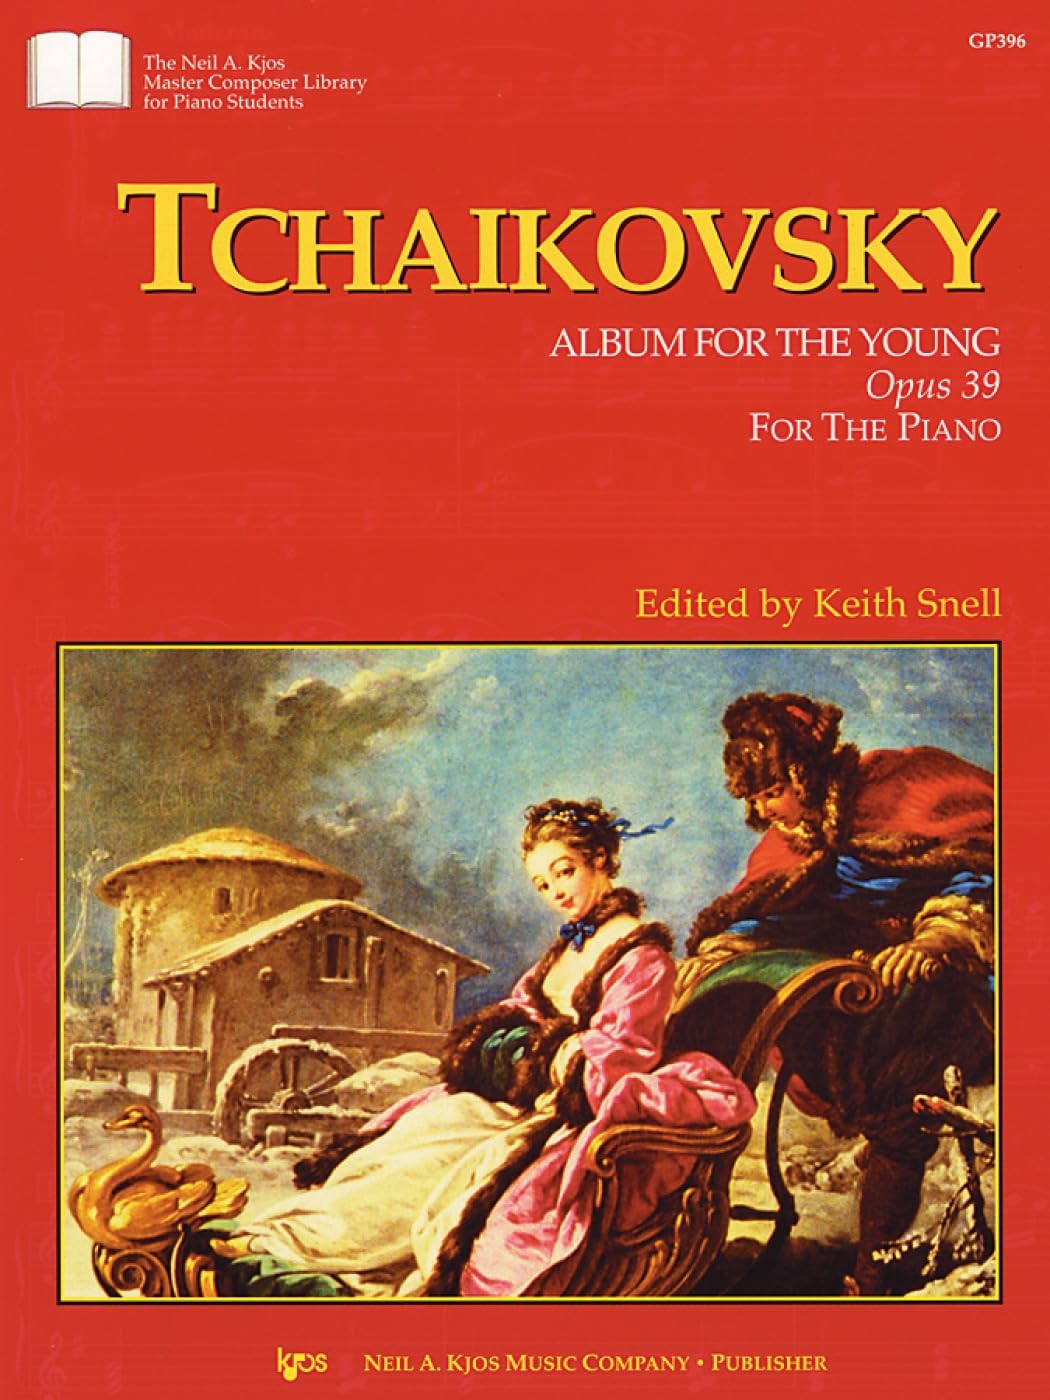 Tchaikovsky Album for the Young Op.39 (KJOS) Piano Traders